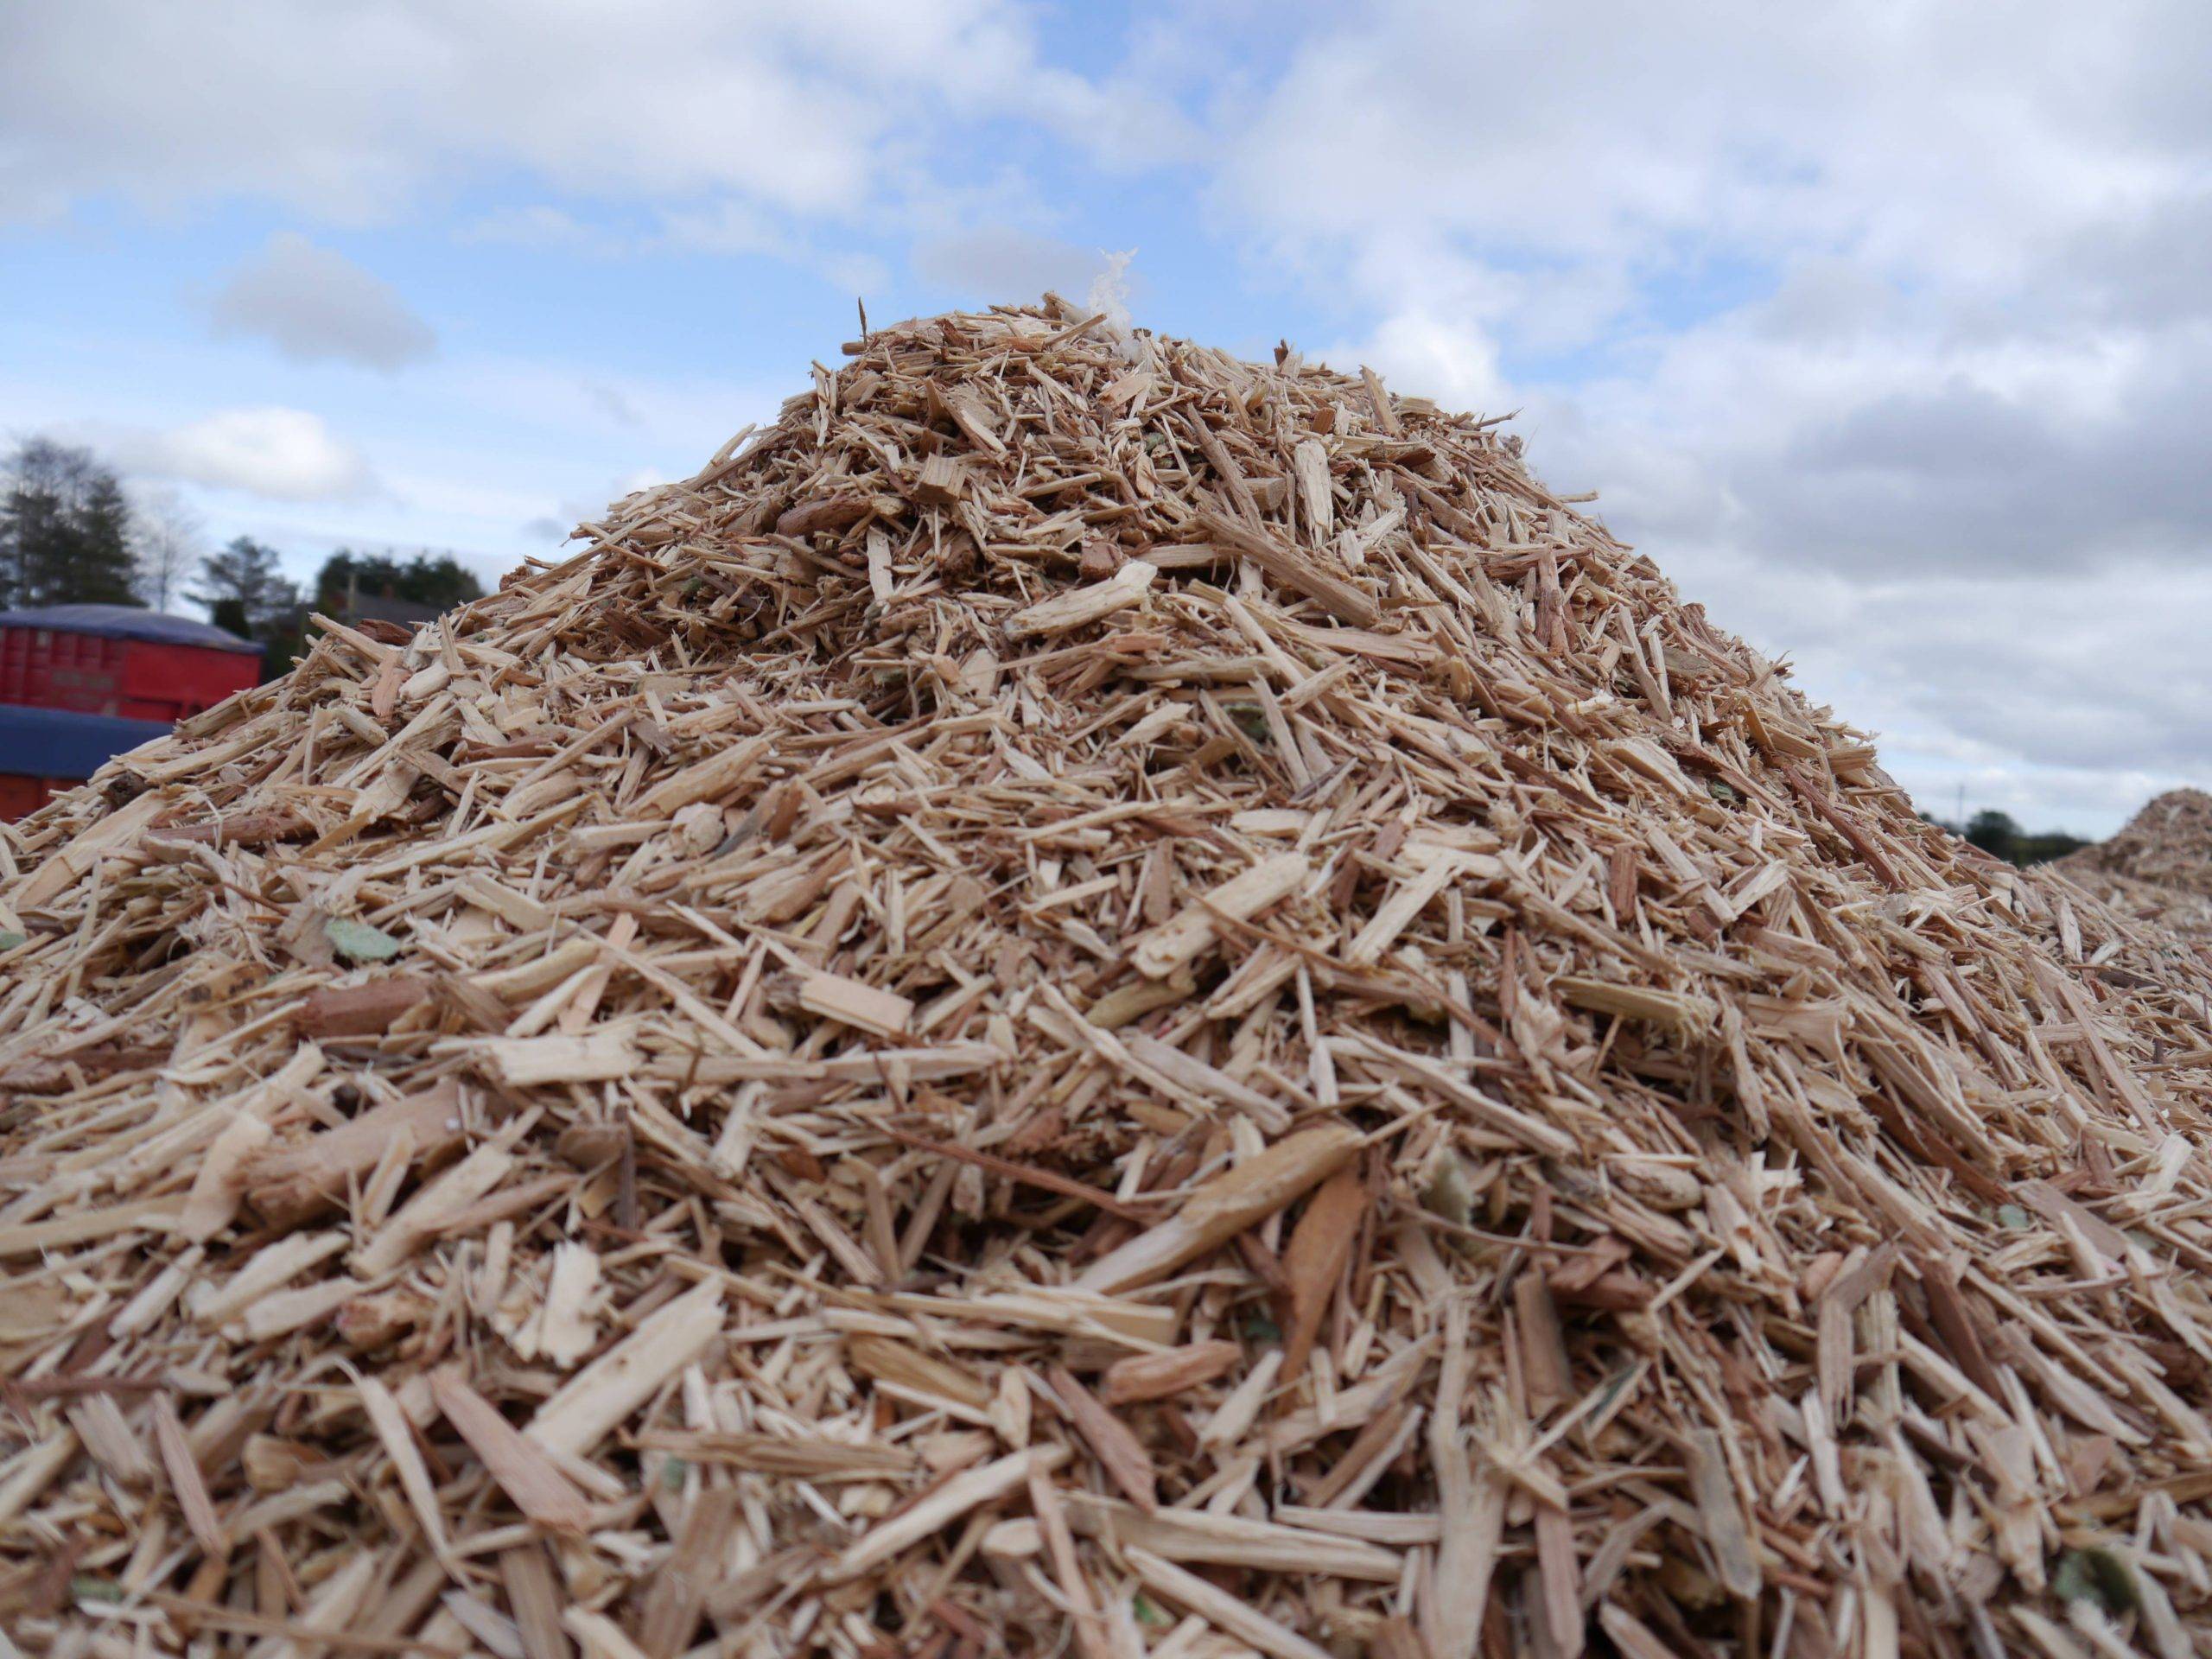 Investment in Biomass Fuel is the Future